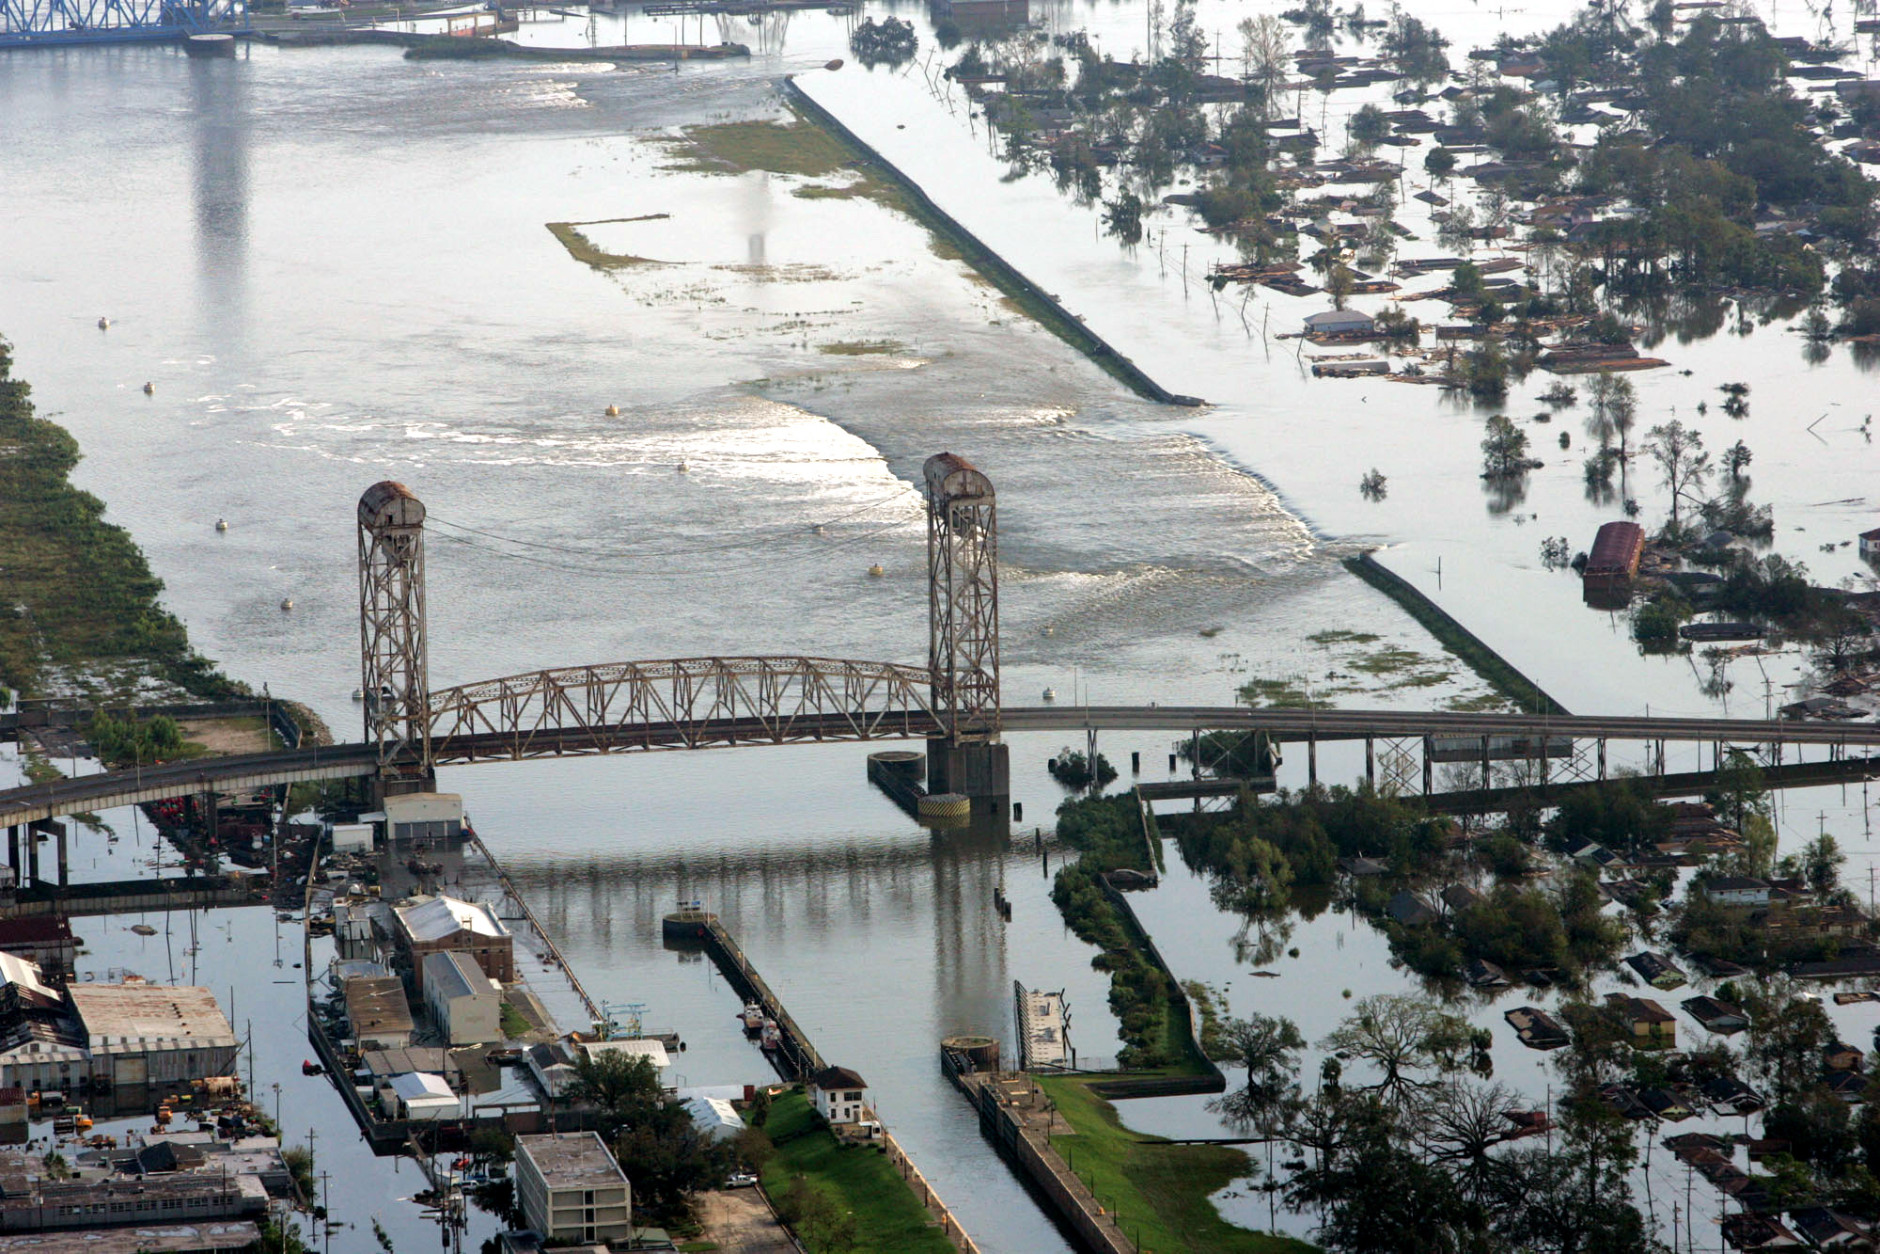 Floodwaters from Hurricane Katrina flow over a levee along Inner Harbor Navigaional Canal near downtown New Orleans Tuesday, Aug. 30, 2005. Hurricane Katrina did extensive damage when it made landfall on Monday. (AP Photo/David J. Phillip)